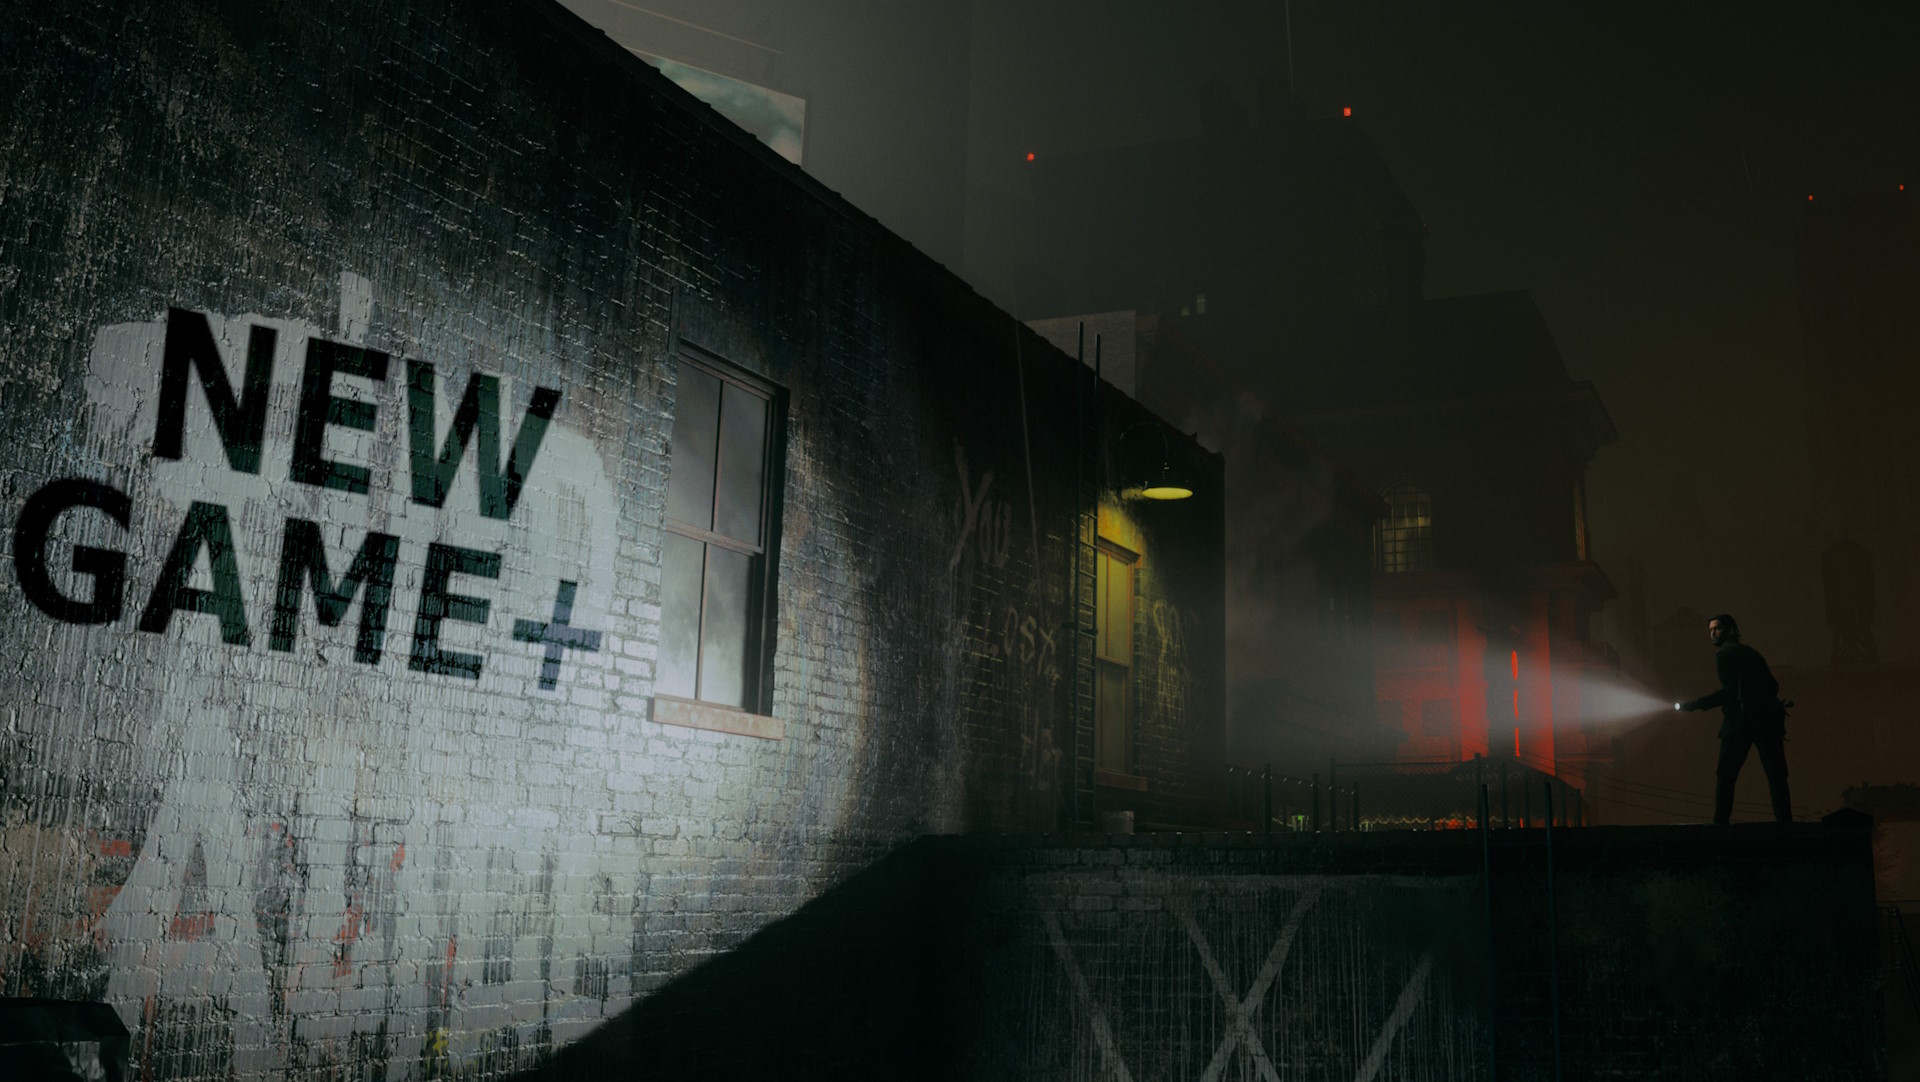 New Alan Wake 2 Update Live, Huge Patch Notes Reveal 54 Changes to Game